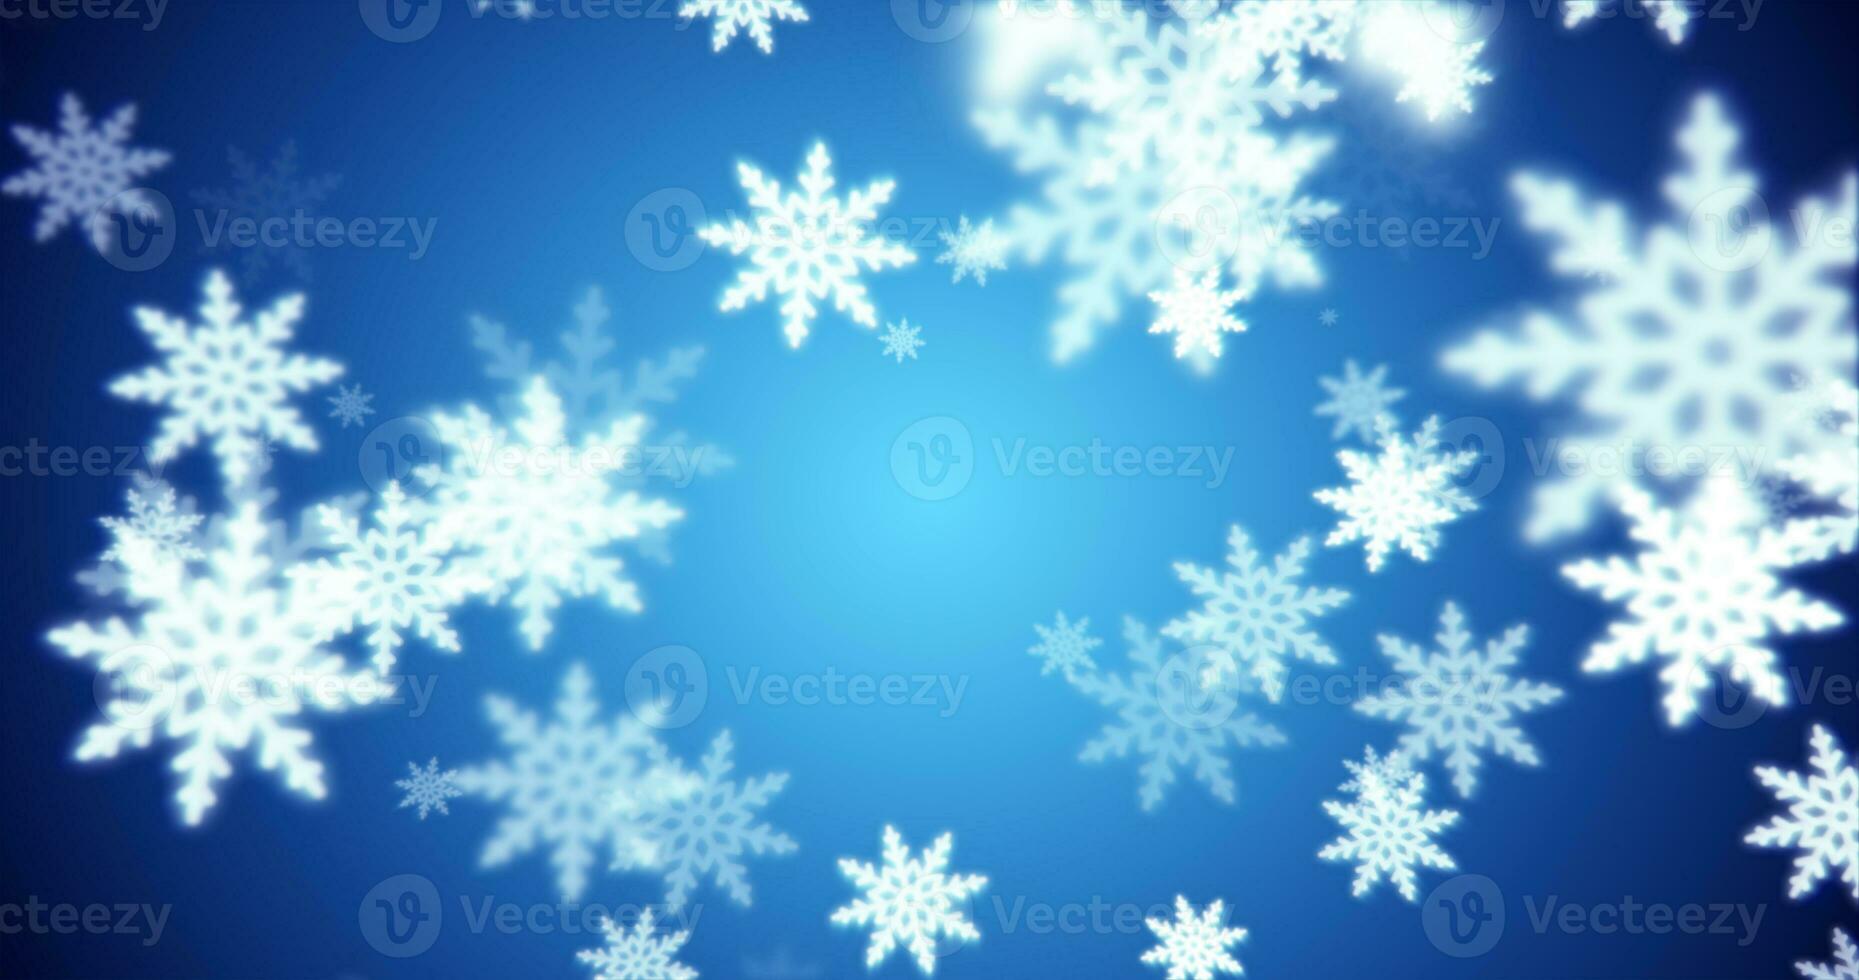 Christmas festive bright New Year background made of white glowing winter beautiful falling flying snowflakes patterns on a blue background photo